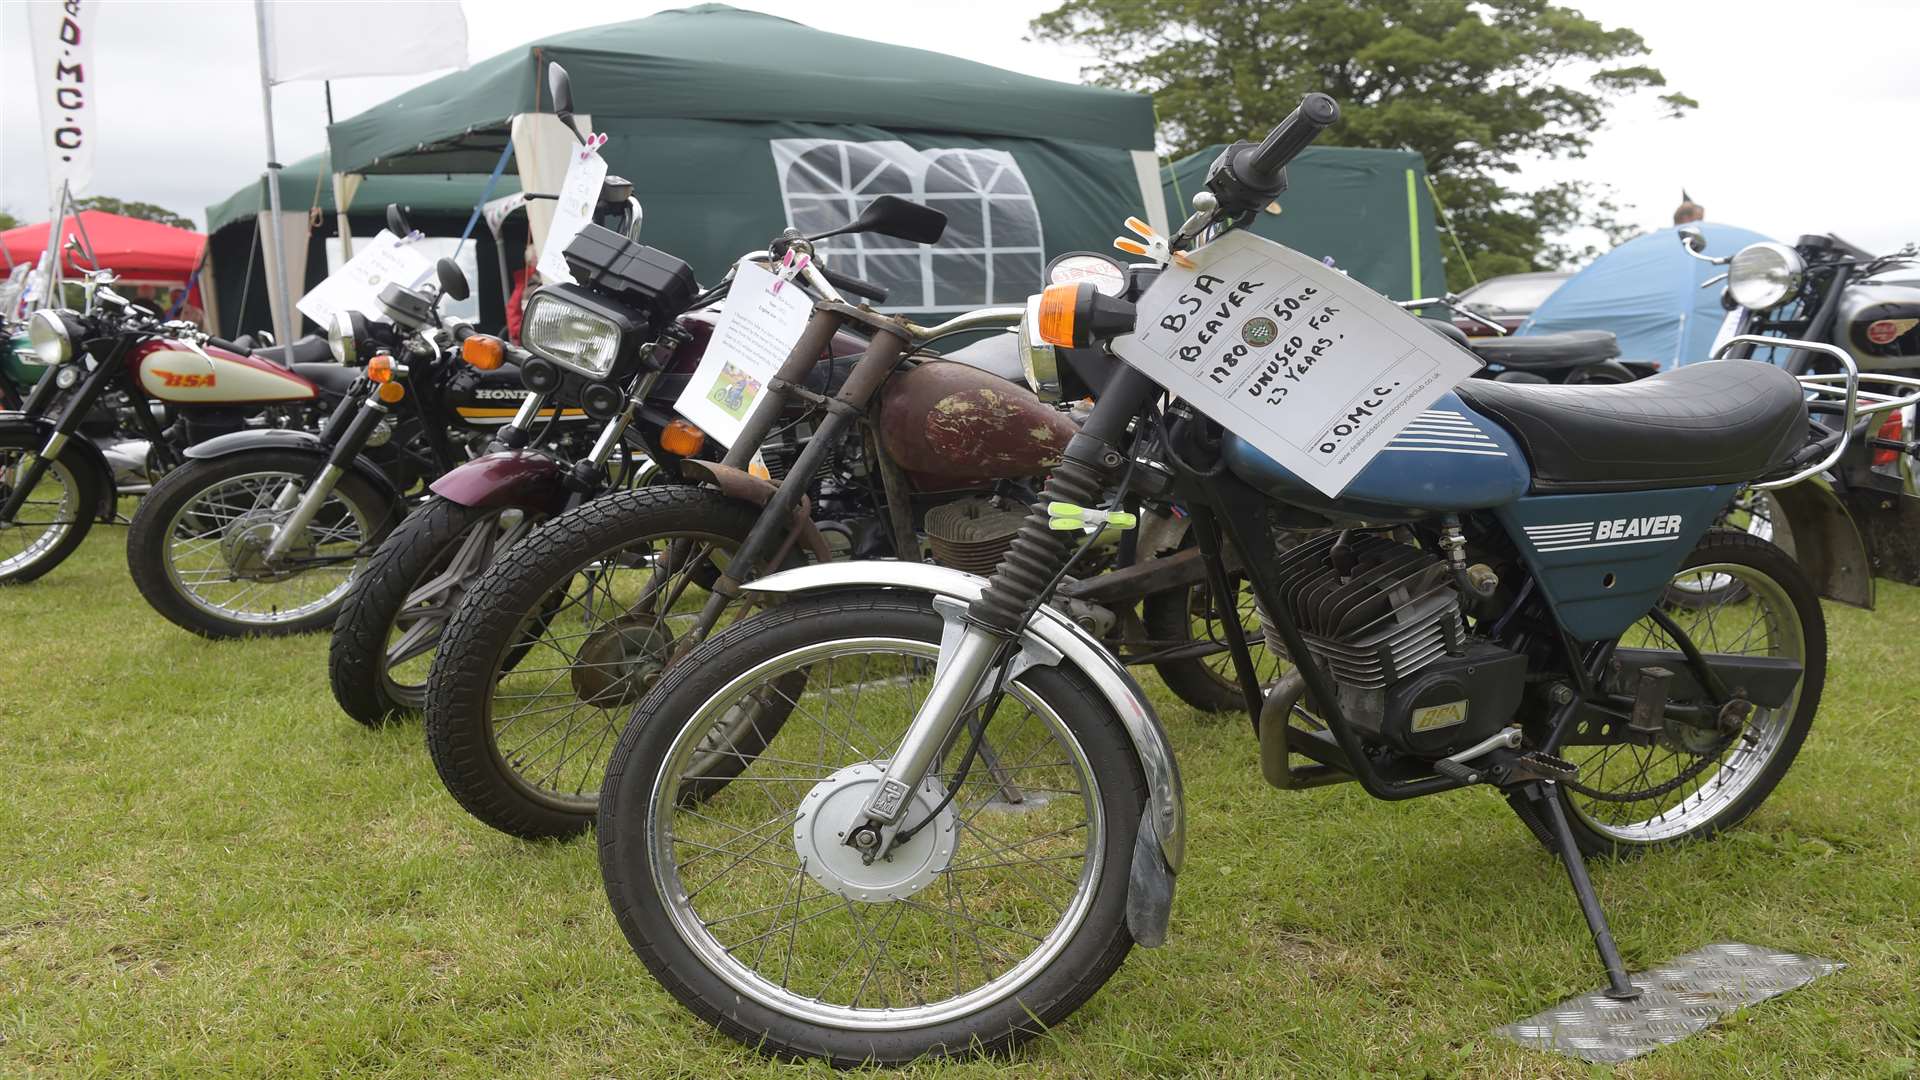 Classic motor enthusiasts could be seen enjoying the display of vehicles